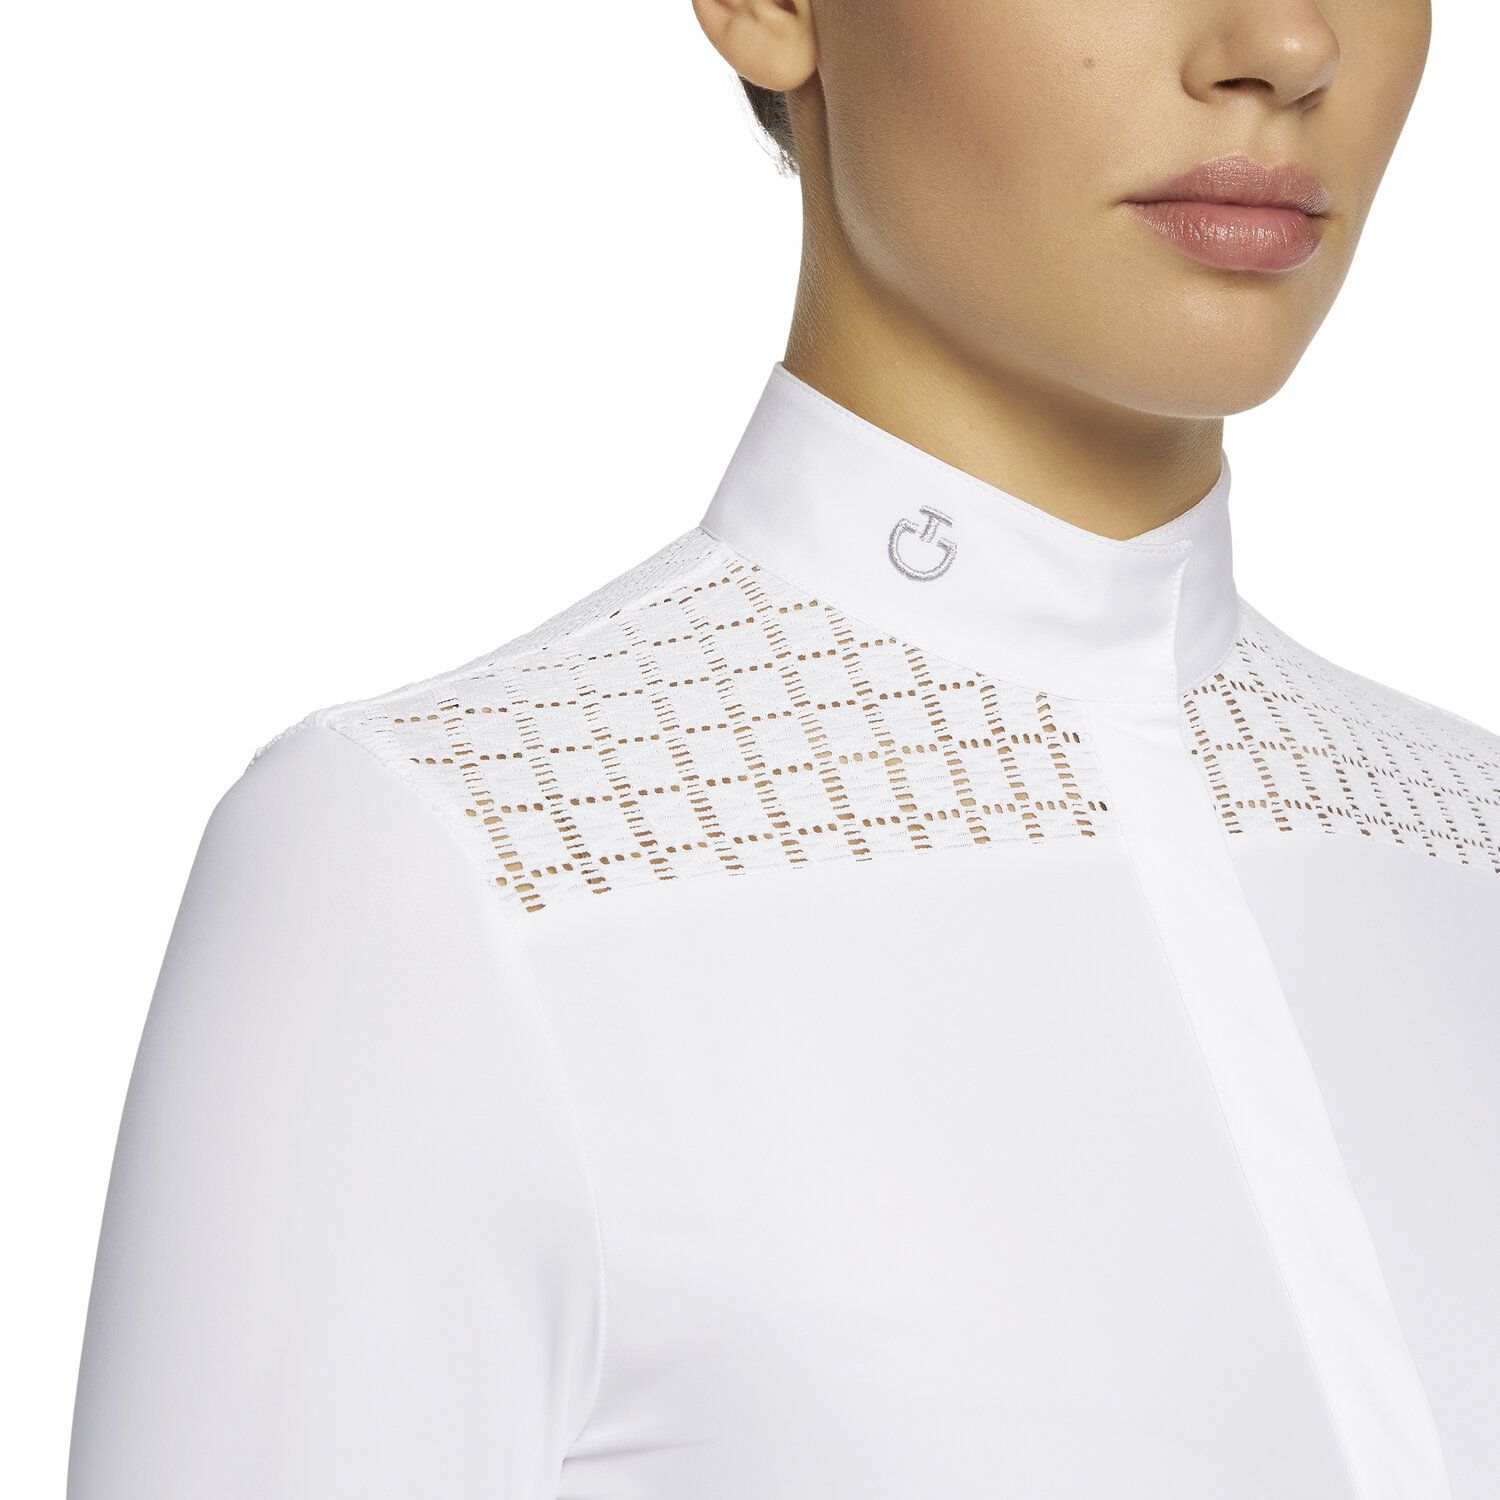 Cavalleria Toscana Women's White Shirt with Perforated Decoration WHITE-4